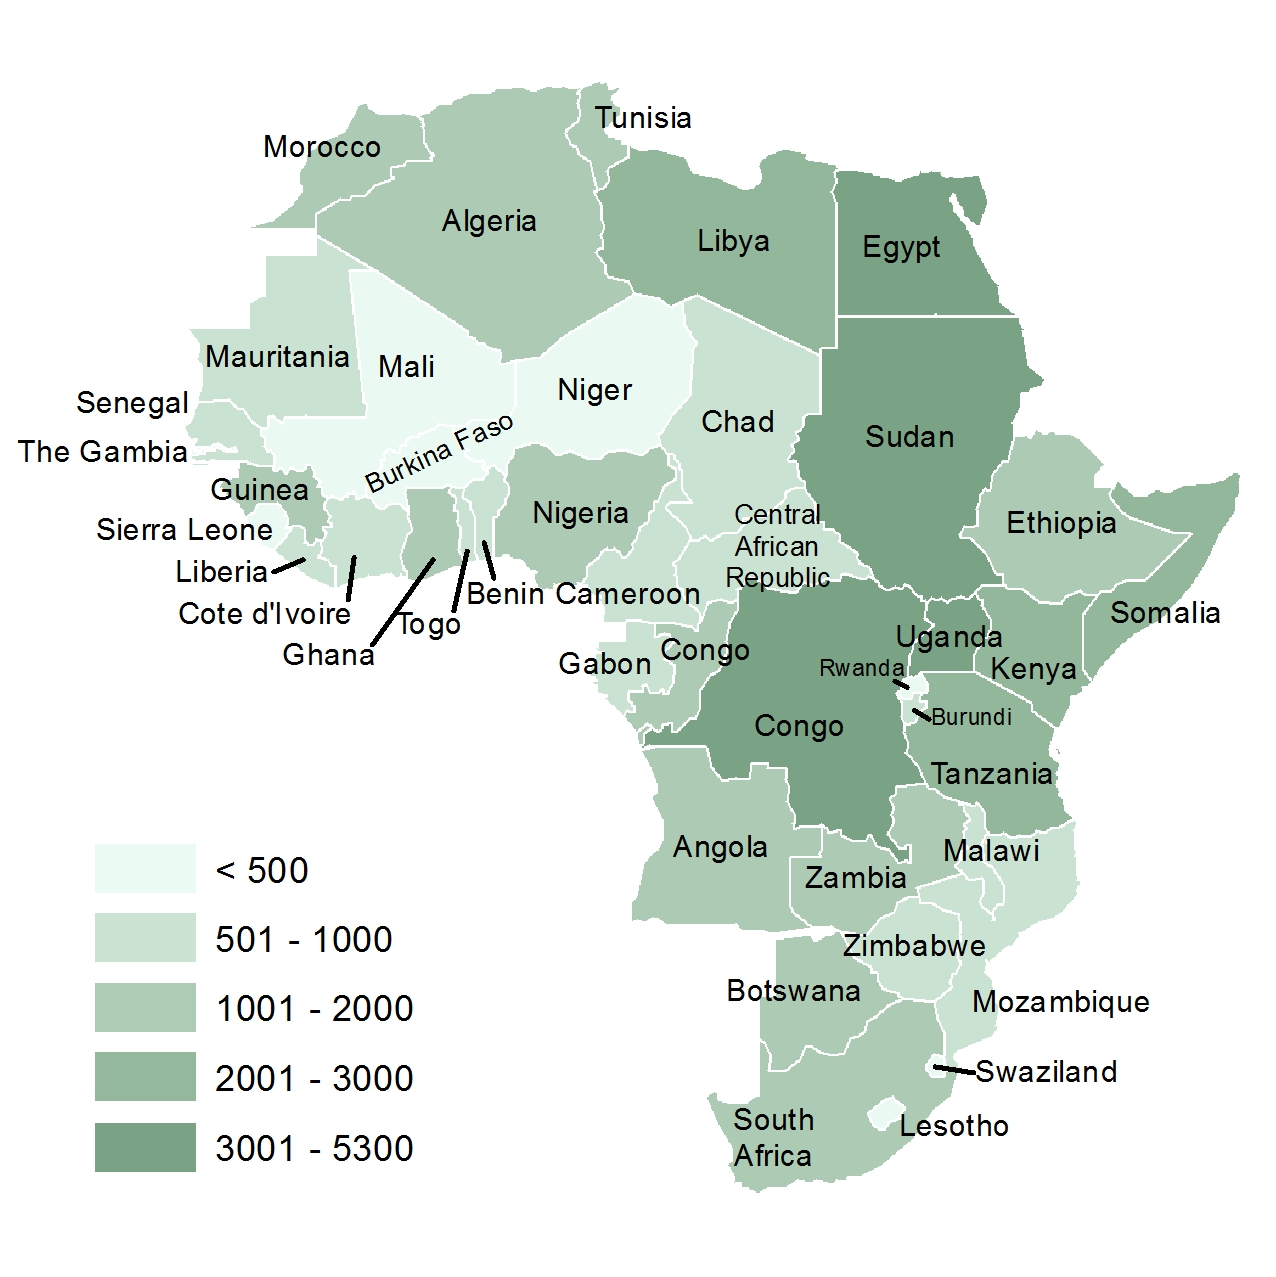 Choropleth representation of African conflict index scores. Countries for which a score was not available are not mapped.